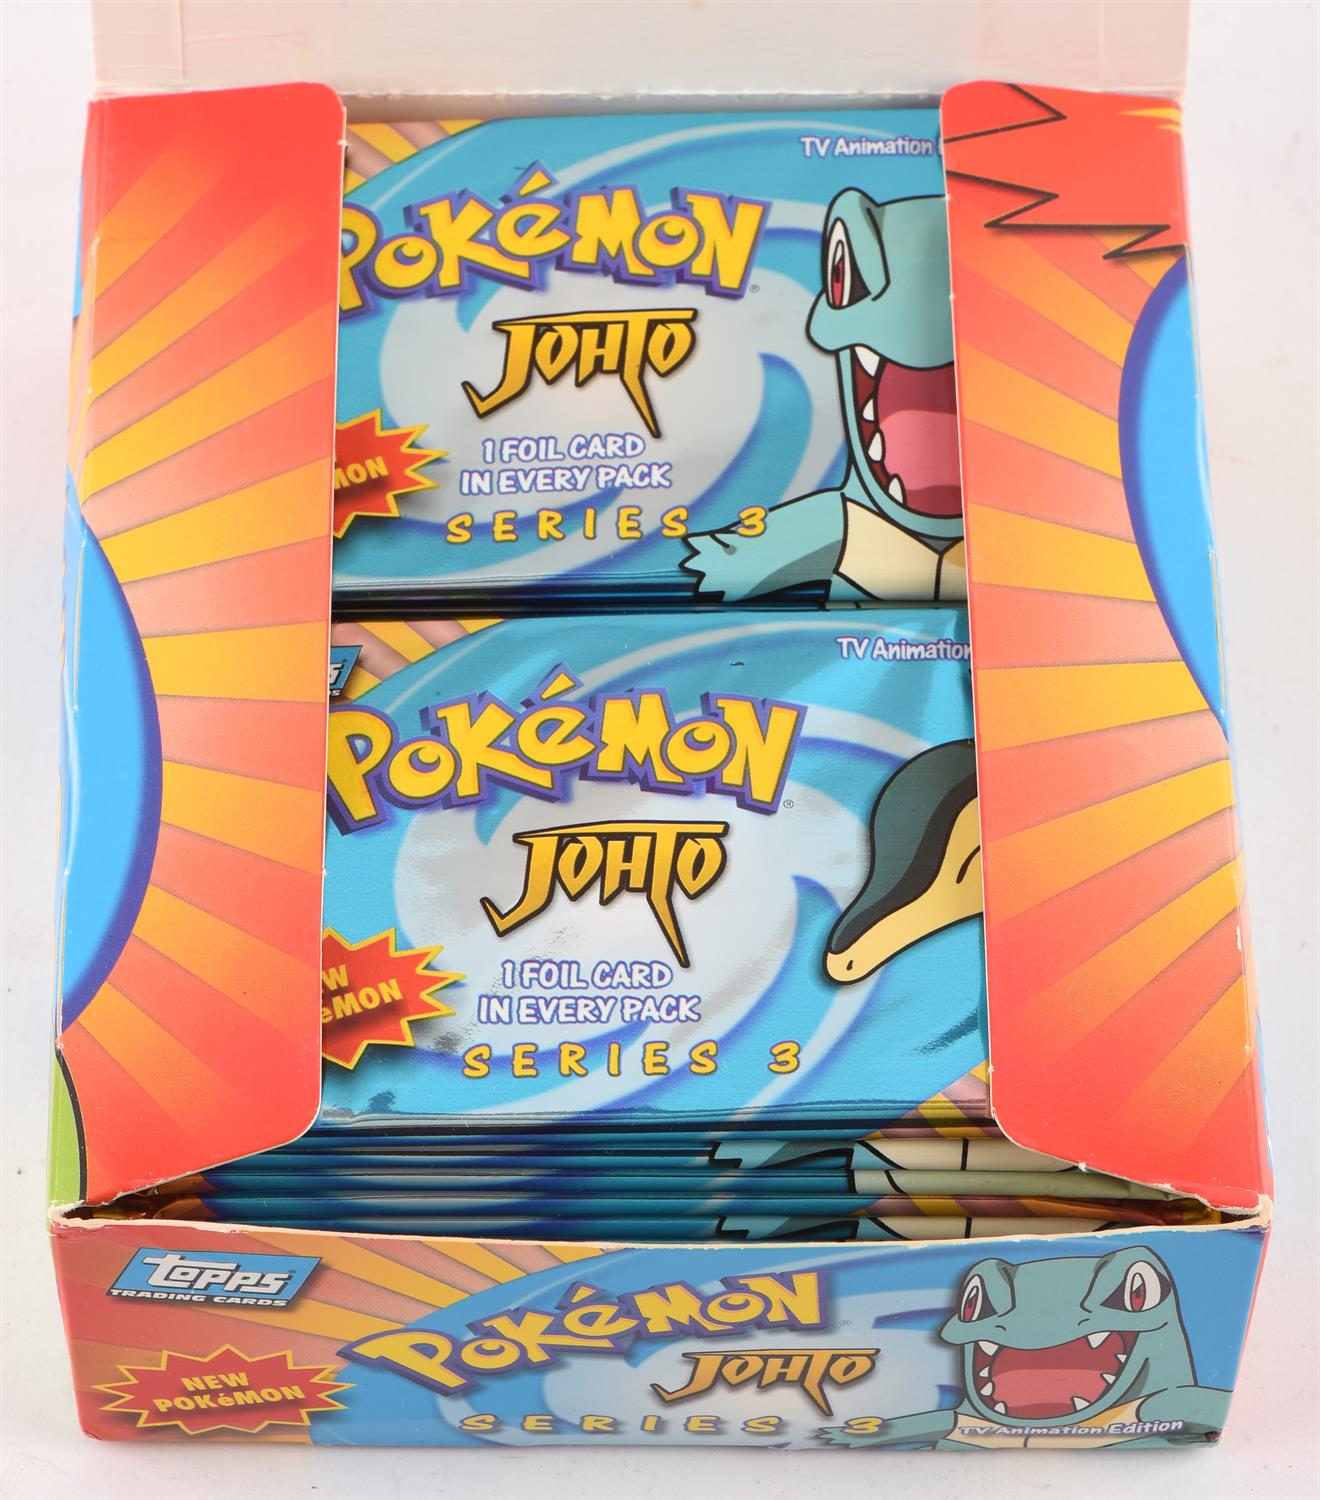 Pokemon TCG. Topps Johto series 3 opened booster box containing 24 sealed packs. Provenance: The - Image 4 of 9